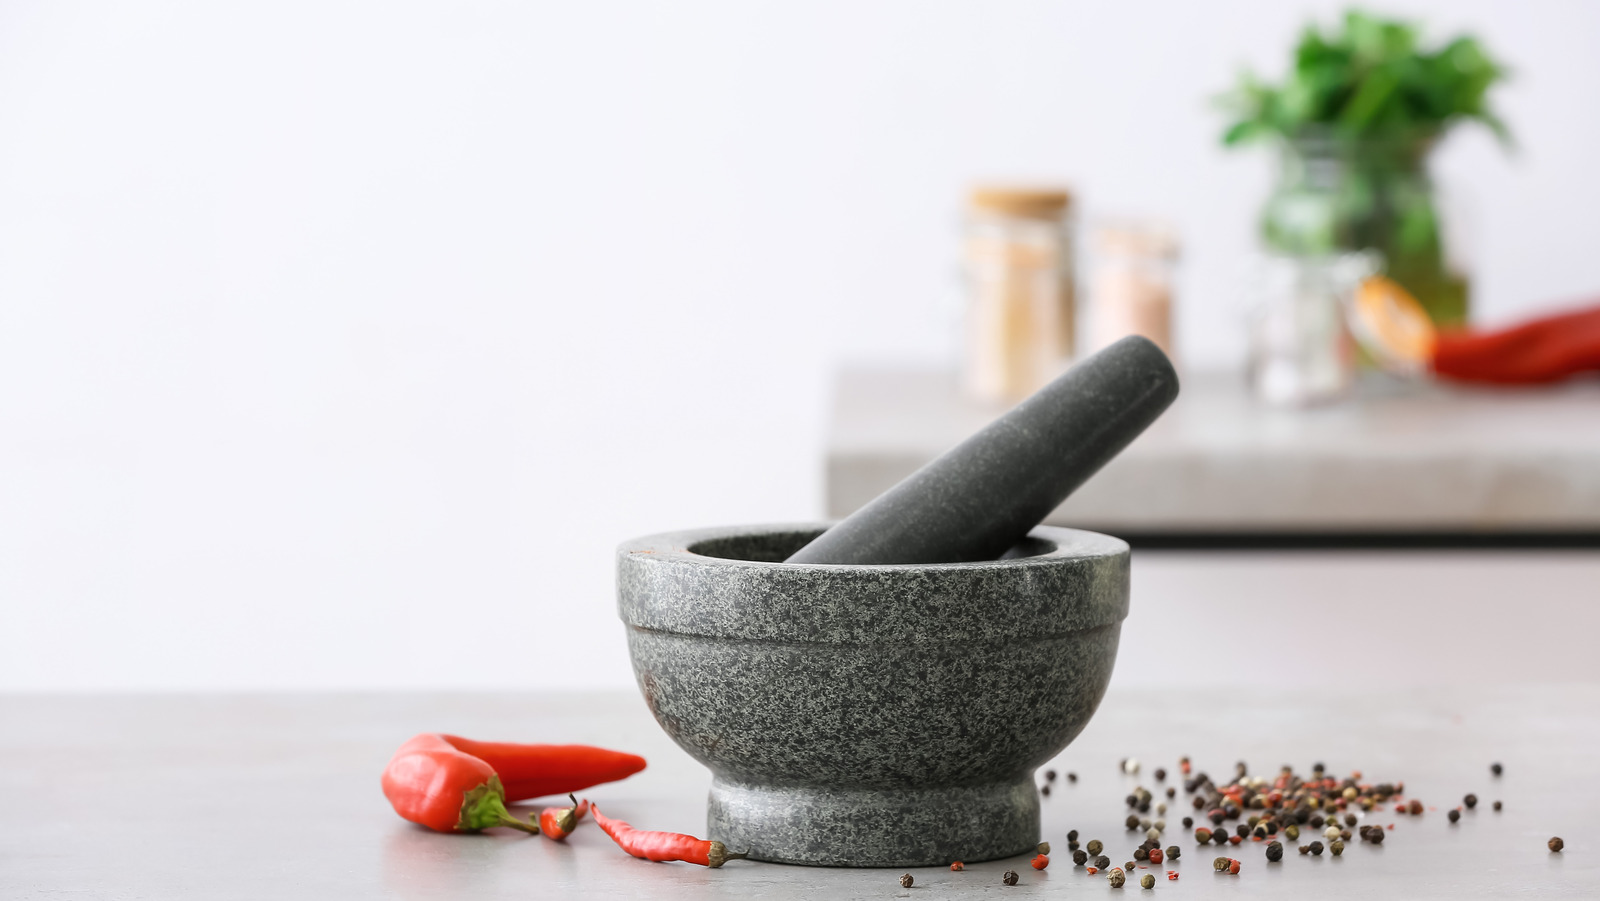 https://www.tastingtable.com/img/gallery/everything-you-need-to-know-about-the-mortar-and-pestle/l-intro-1663601655.jpg